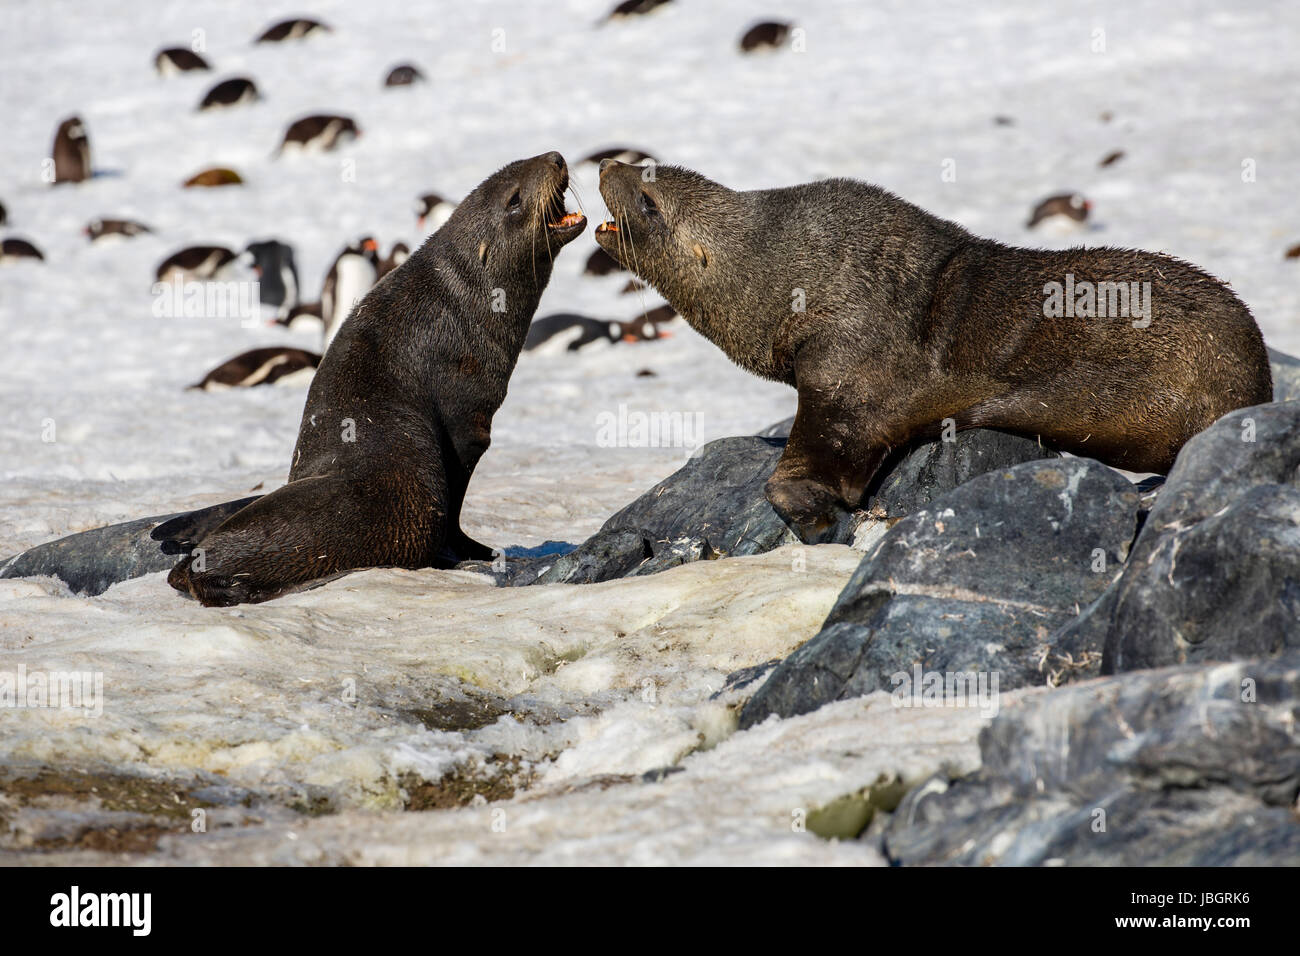 Fur seals fighting on Cuverville Island, Antarctica Stock Photo